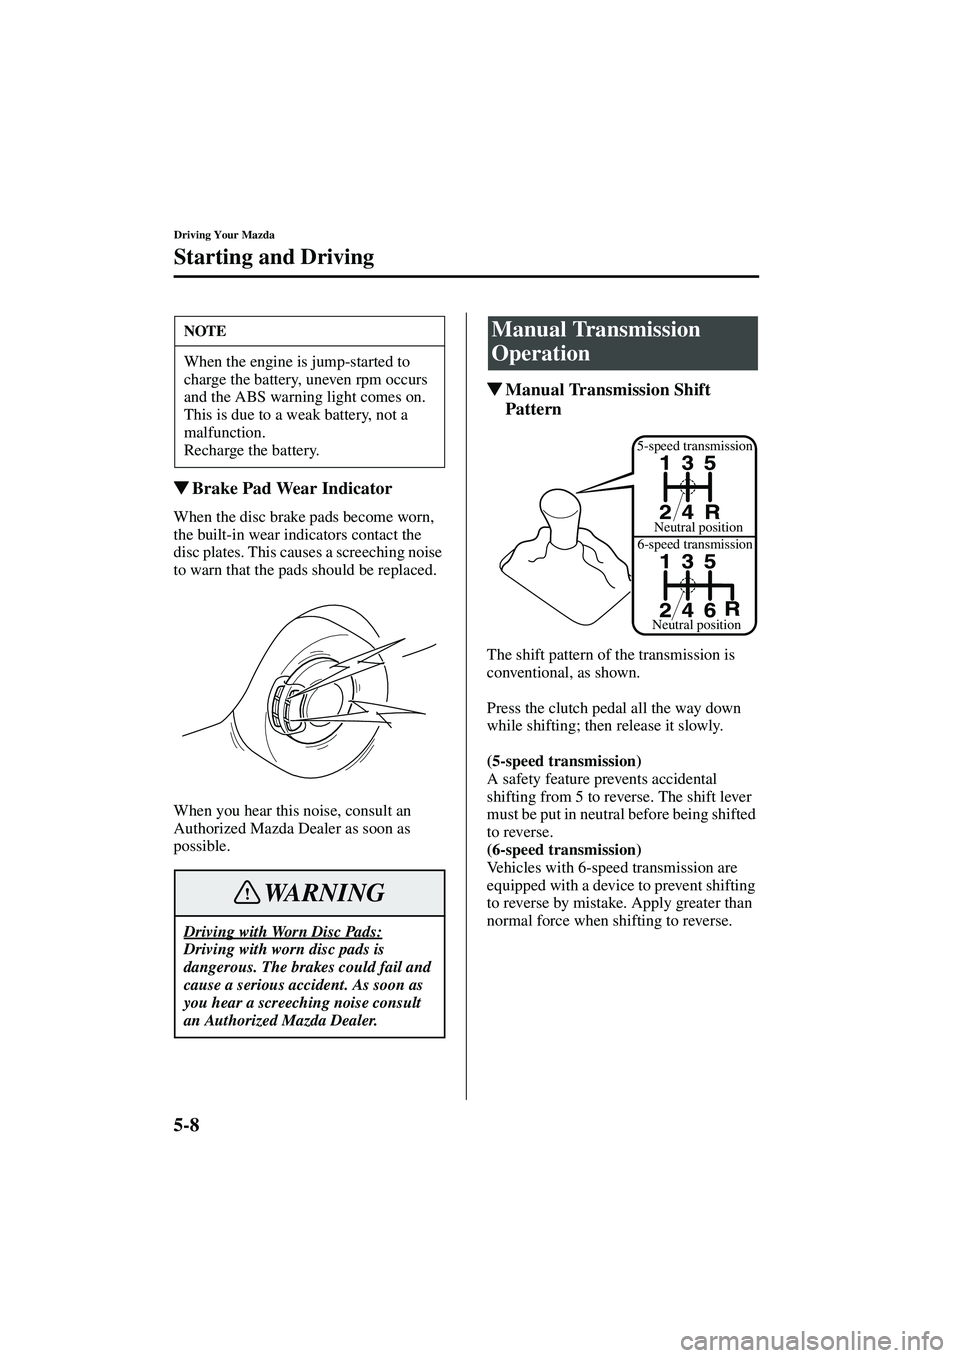 MAZDA MODEL MX-5 MIATA 2003  Owners Manual 5-8
Driving Your Mazda
Starting and Driving
Form No. 8R09-EA-02G
Brake Pad Wear Indicator
When the disc brake pads become worn, 
the built-in wear indicators contact the 
disc plates. This causes a s